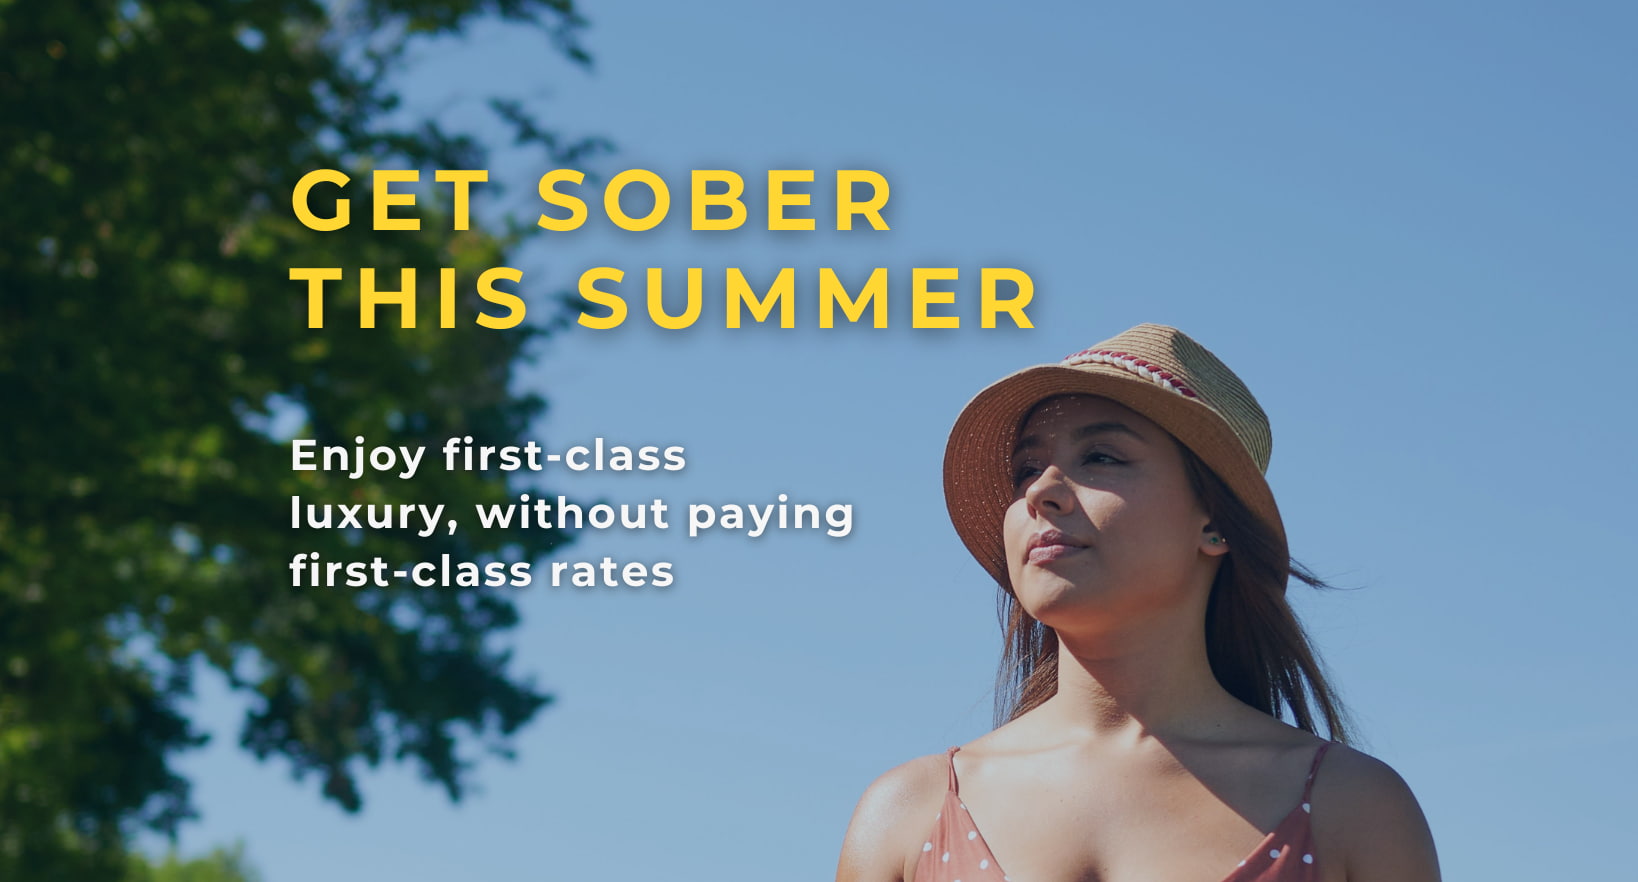 Get sober this summer at our luxury rehab centre in Ontario.